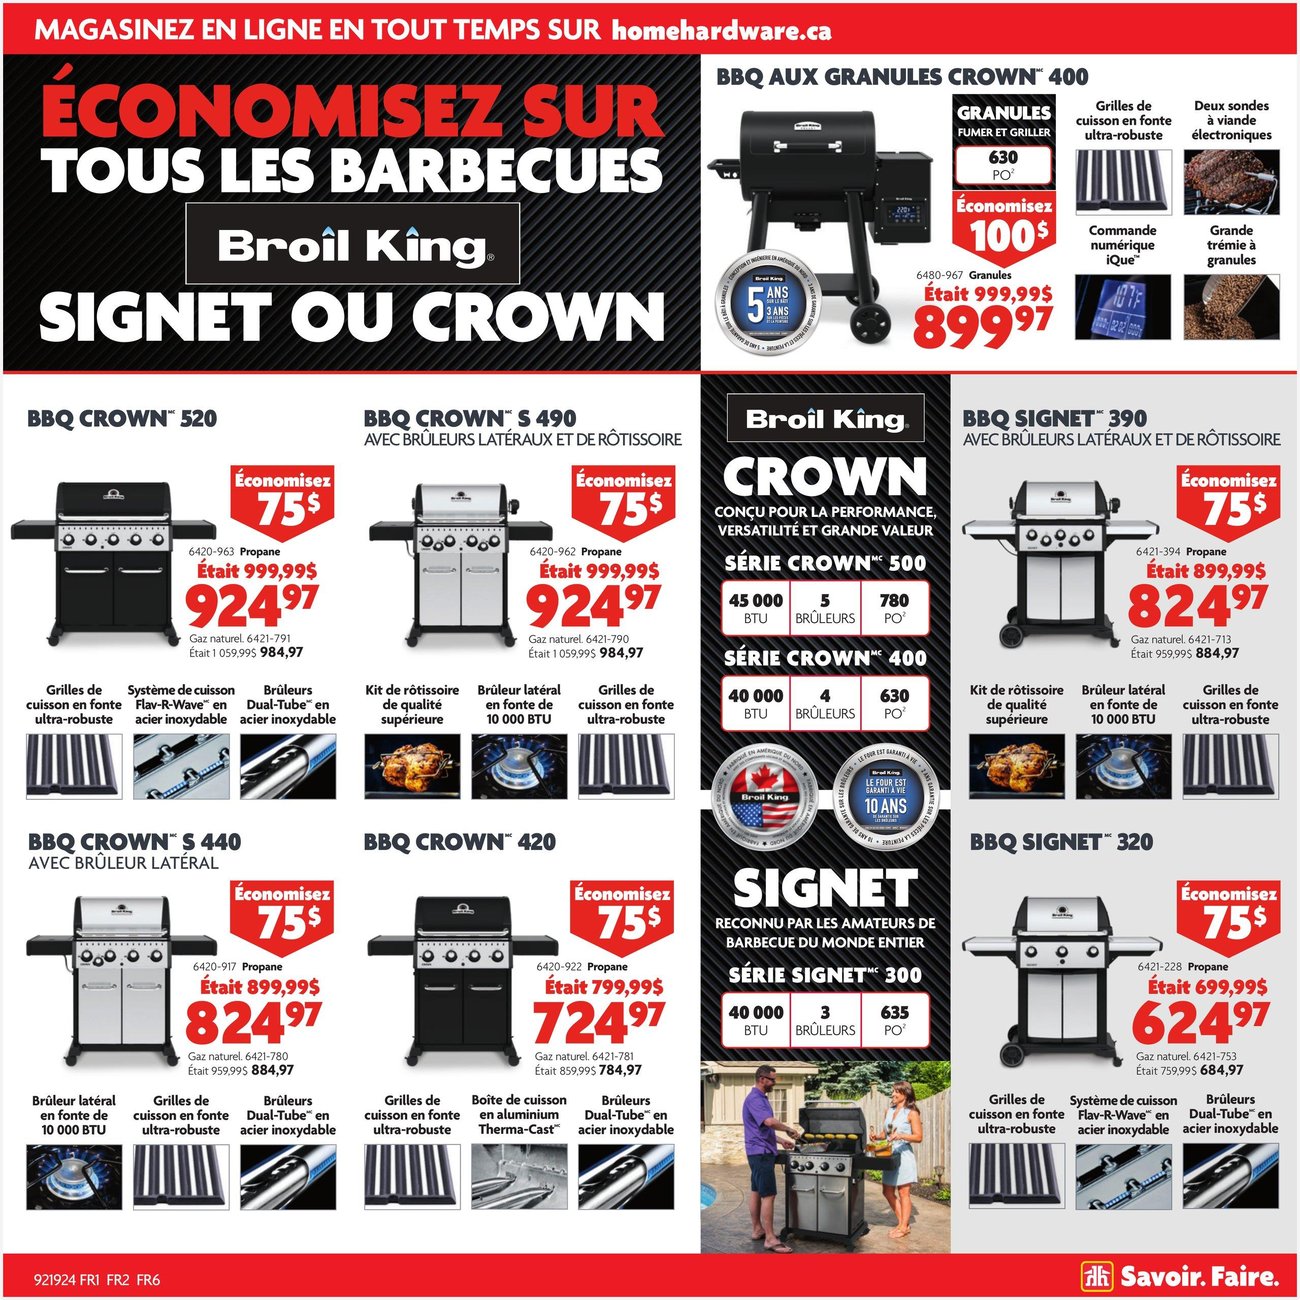 Home Hardware - Quebec - 2 Weeks of Savings - Page 4